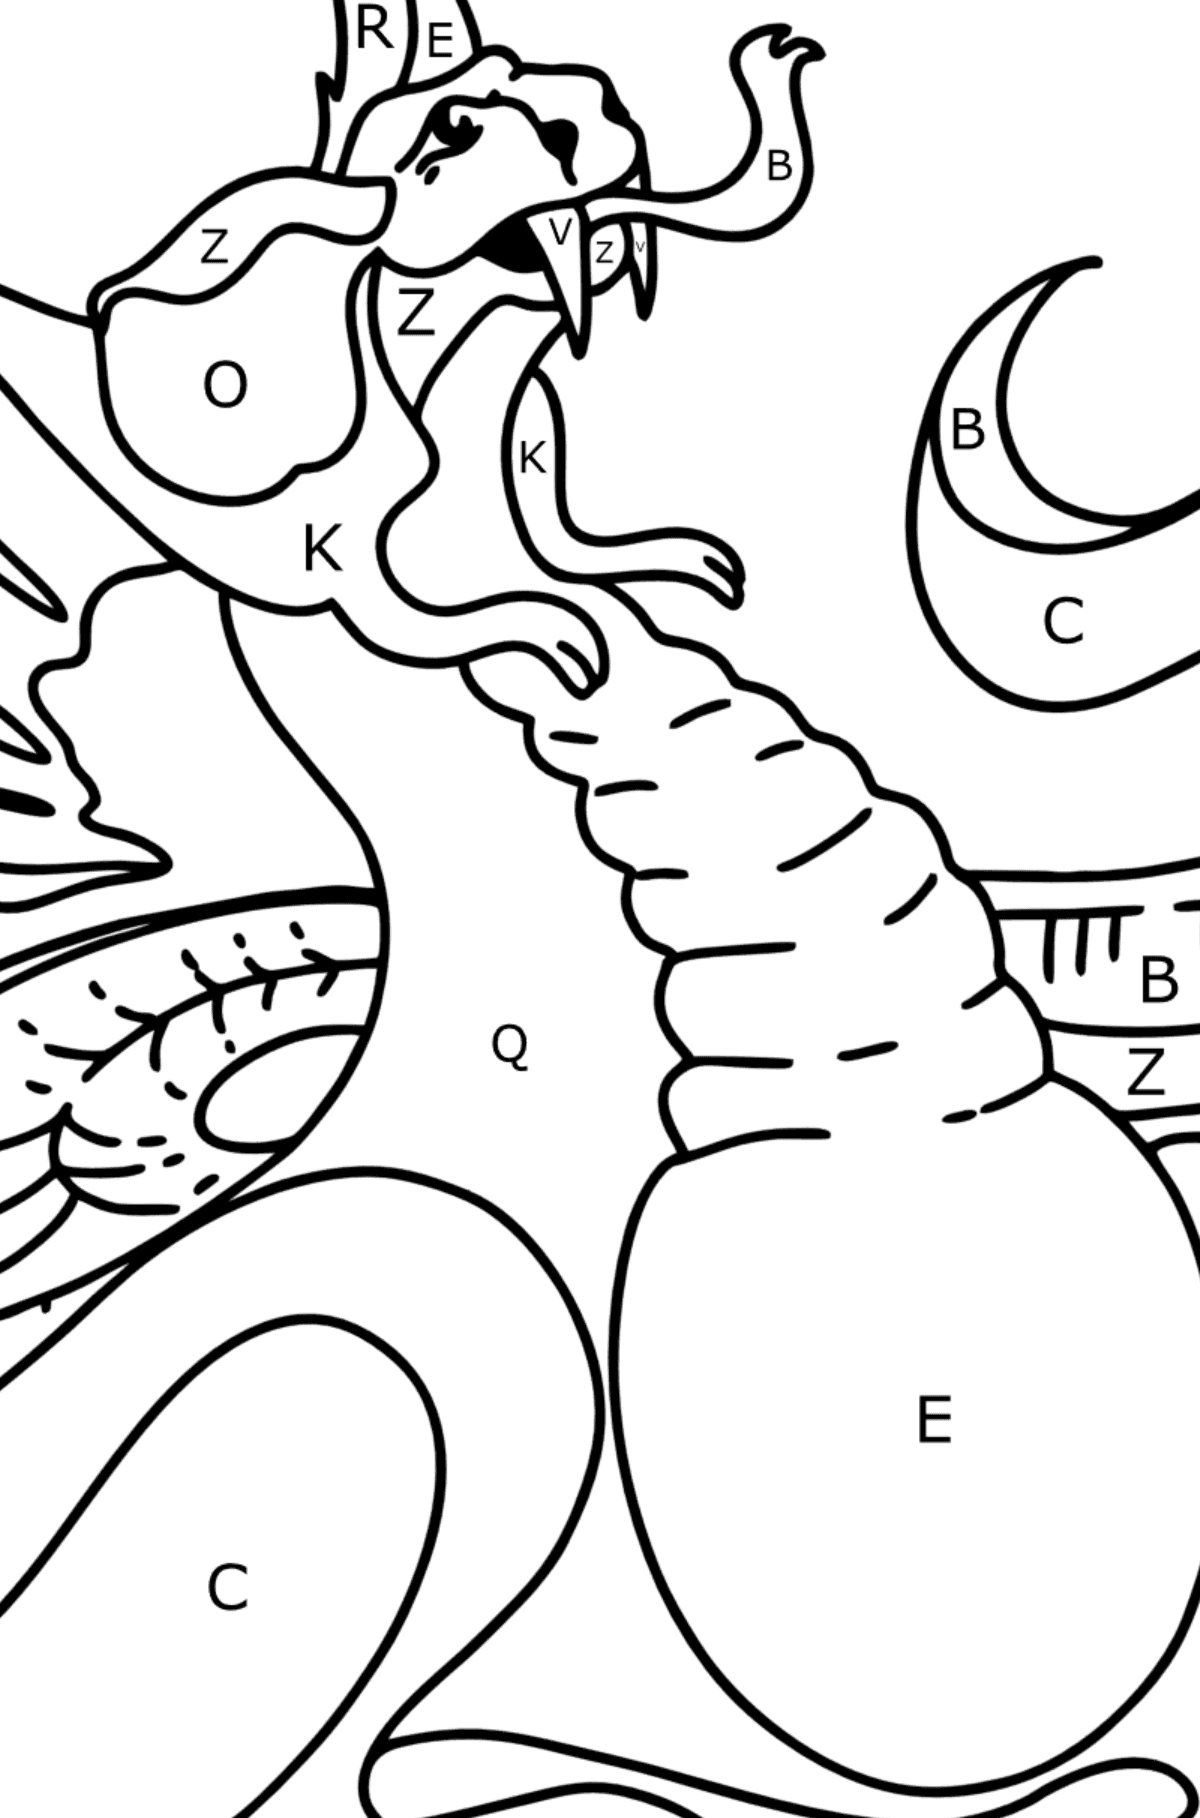 Tired Dragon coloring page - Coloring by Letters for Kids